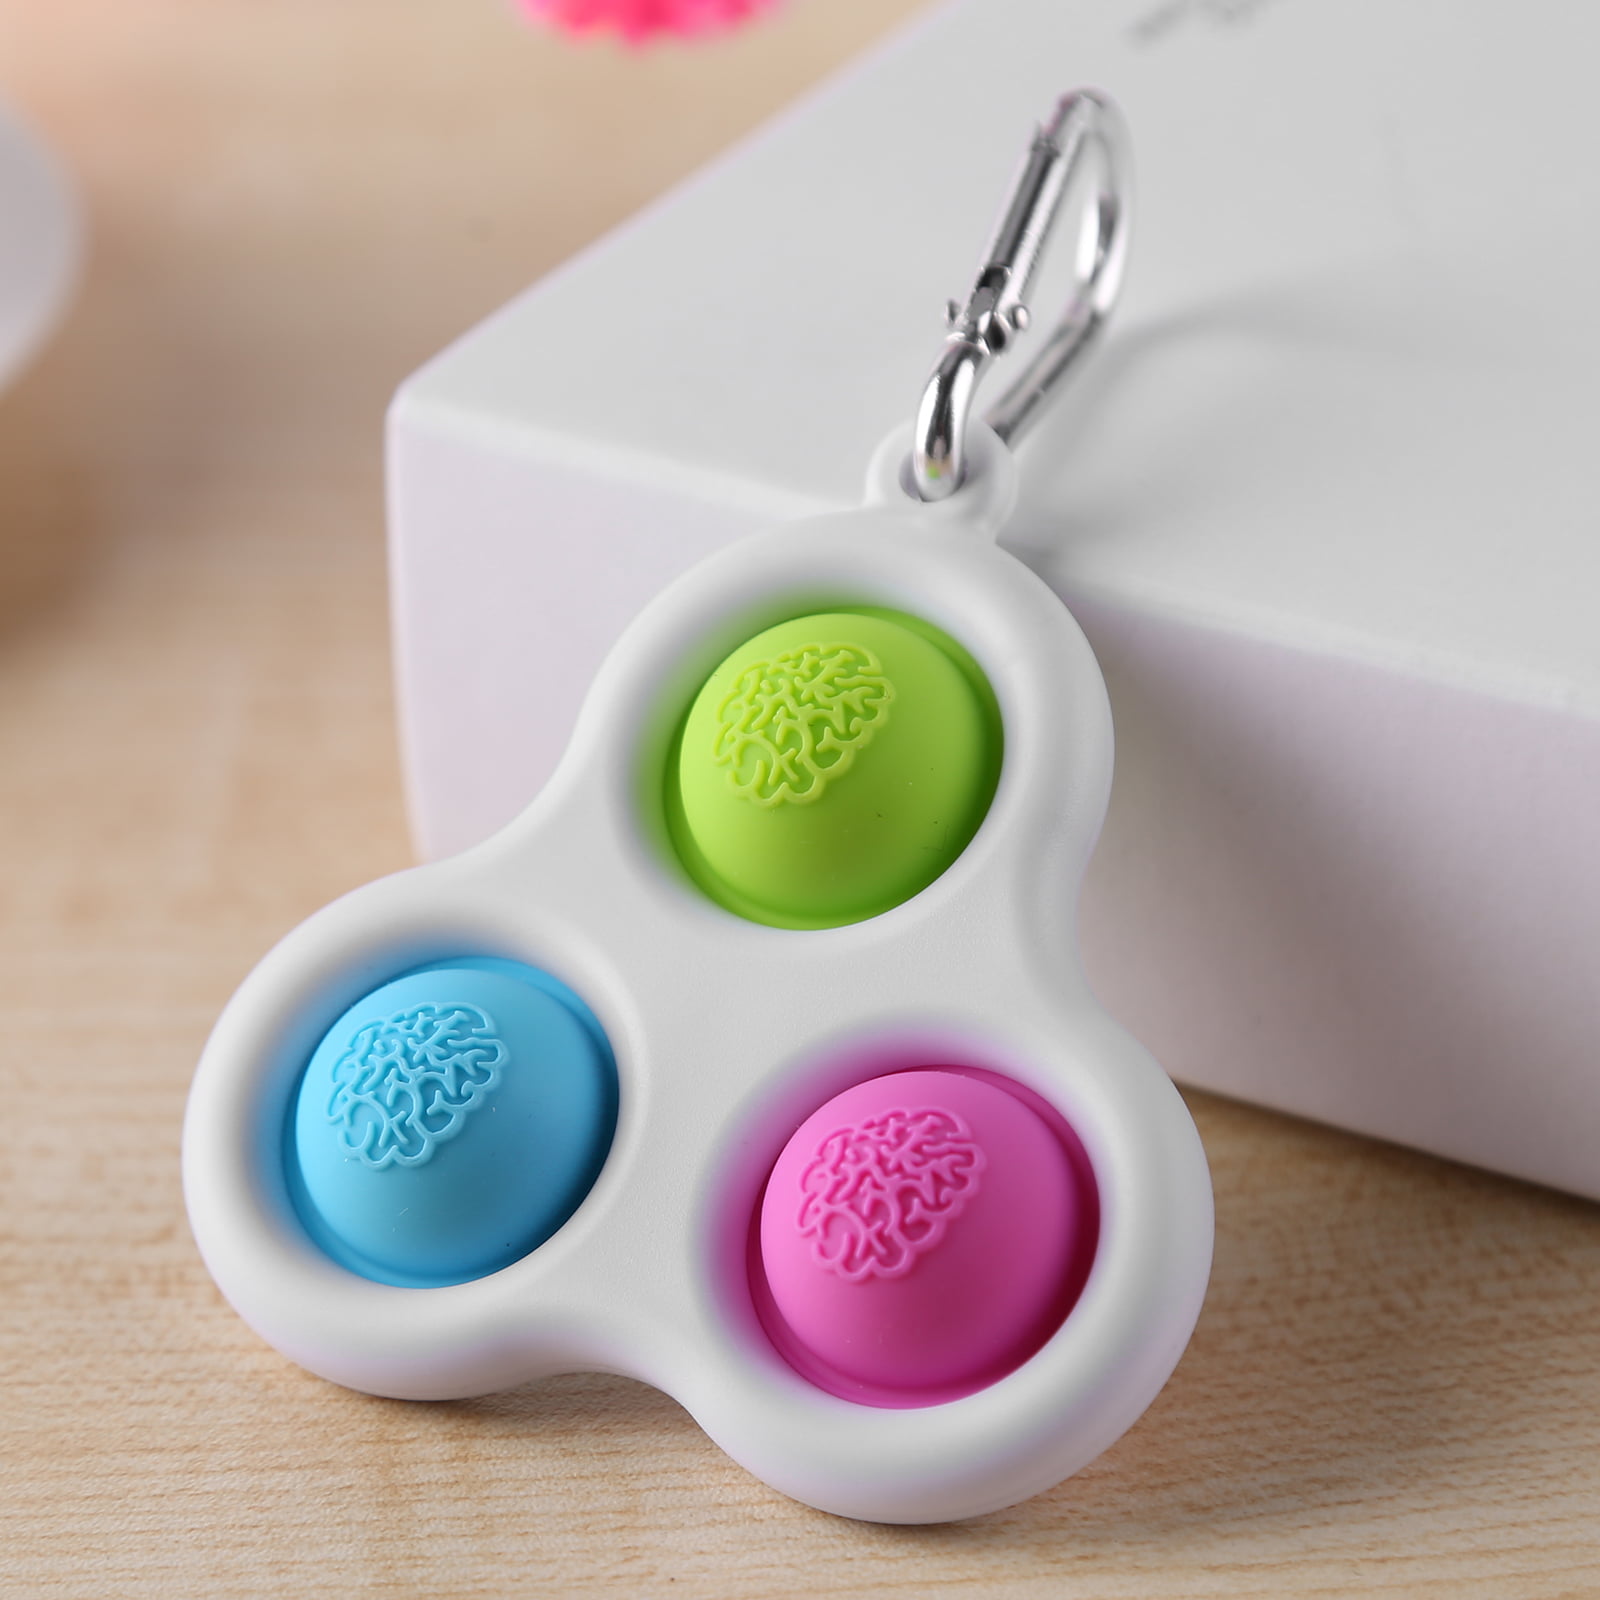 F Taymey 2PCS 2021 Mini Simple dimple Keychain Fidget Toy Simple Dimple Sensory Fidget Toys Mini Stress Reliever Hand Toys Keychain Toy Anxiety Stress Relief Office Desk Toys for Kids Adults 